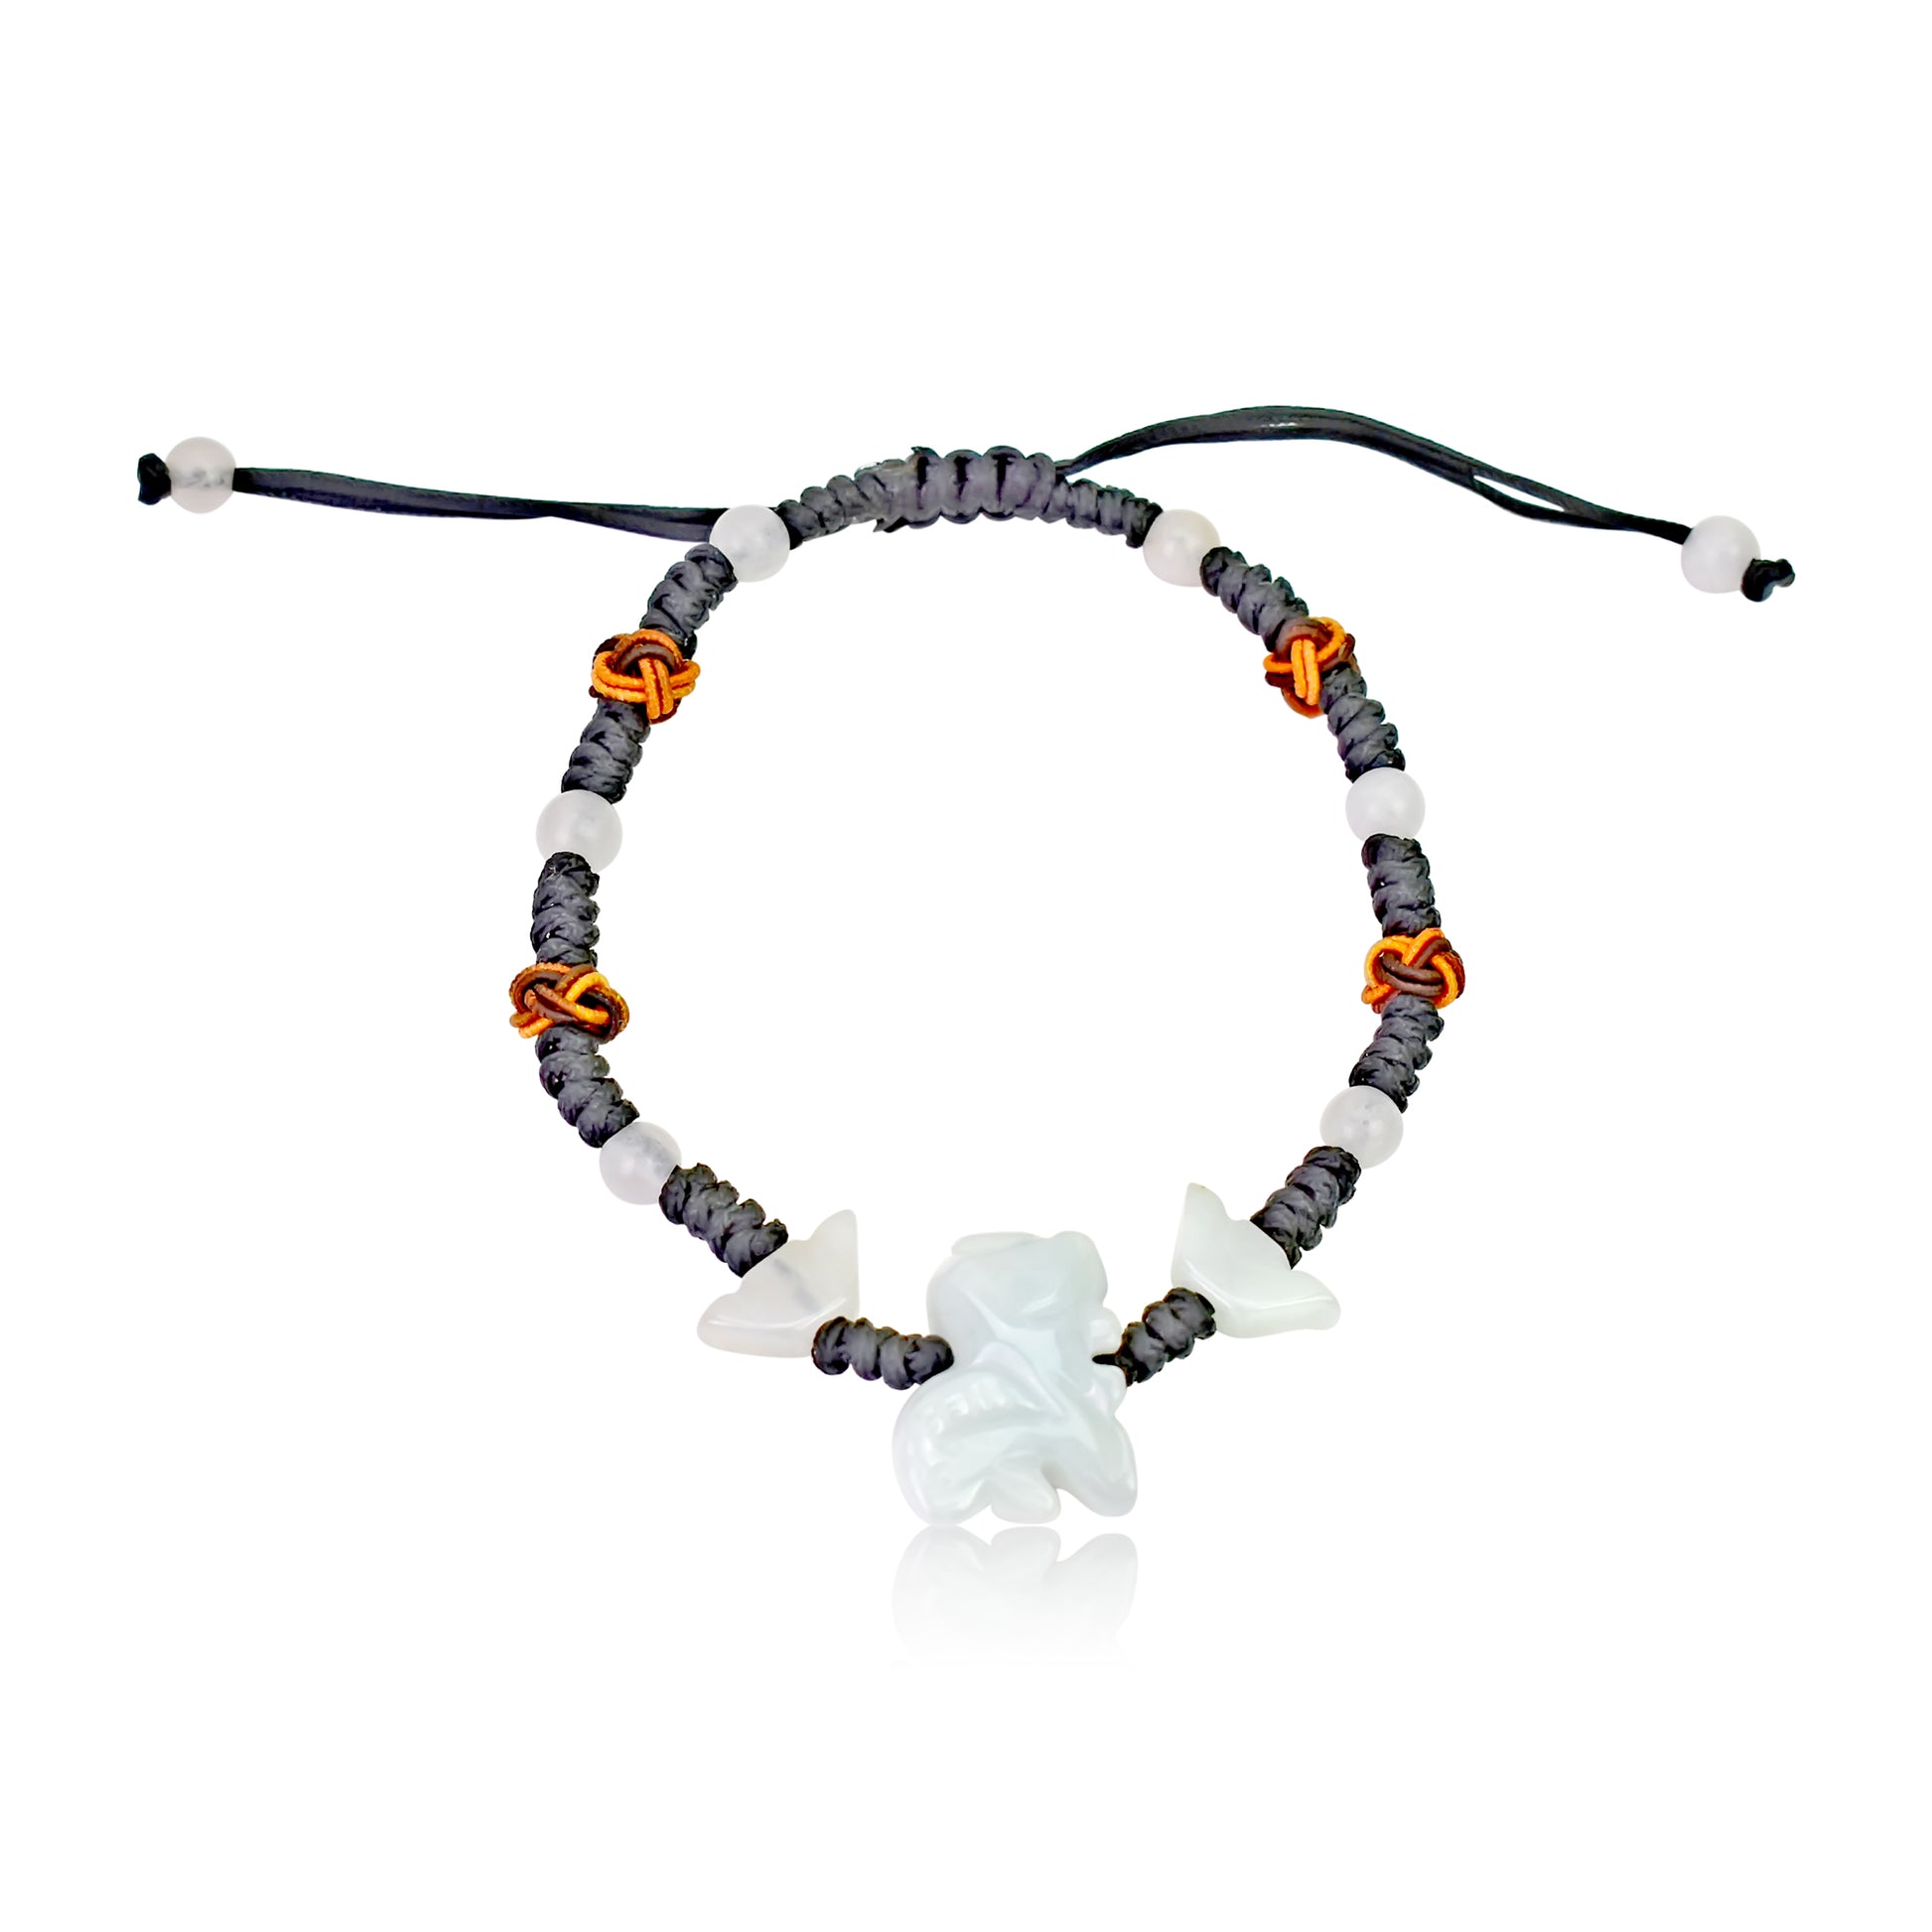 Show Your Sheep Personality with a Handmade Jade Bracelet made with Black Cord